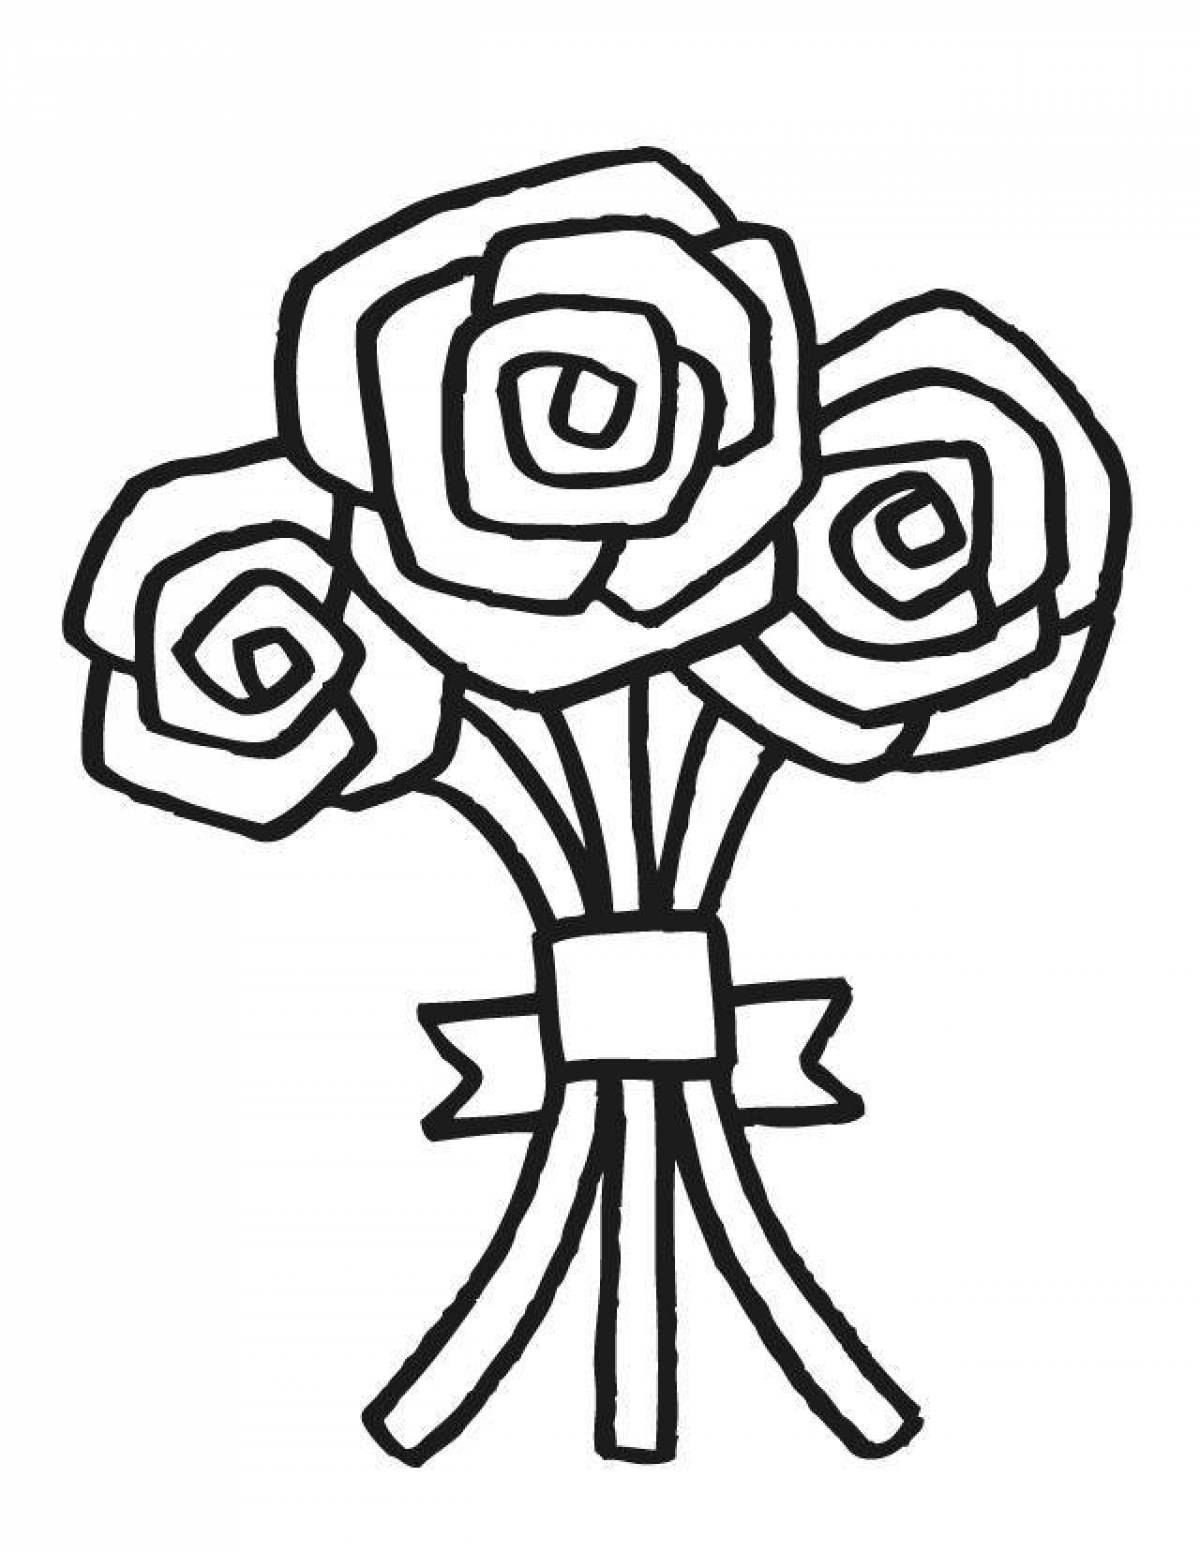 Coloring book beautiful bouquet of roses